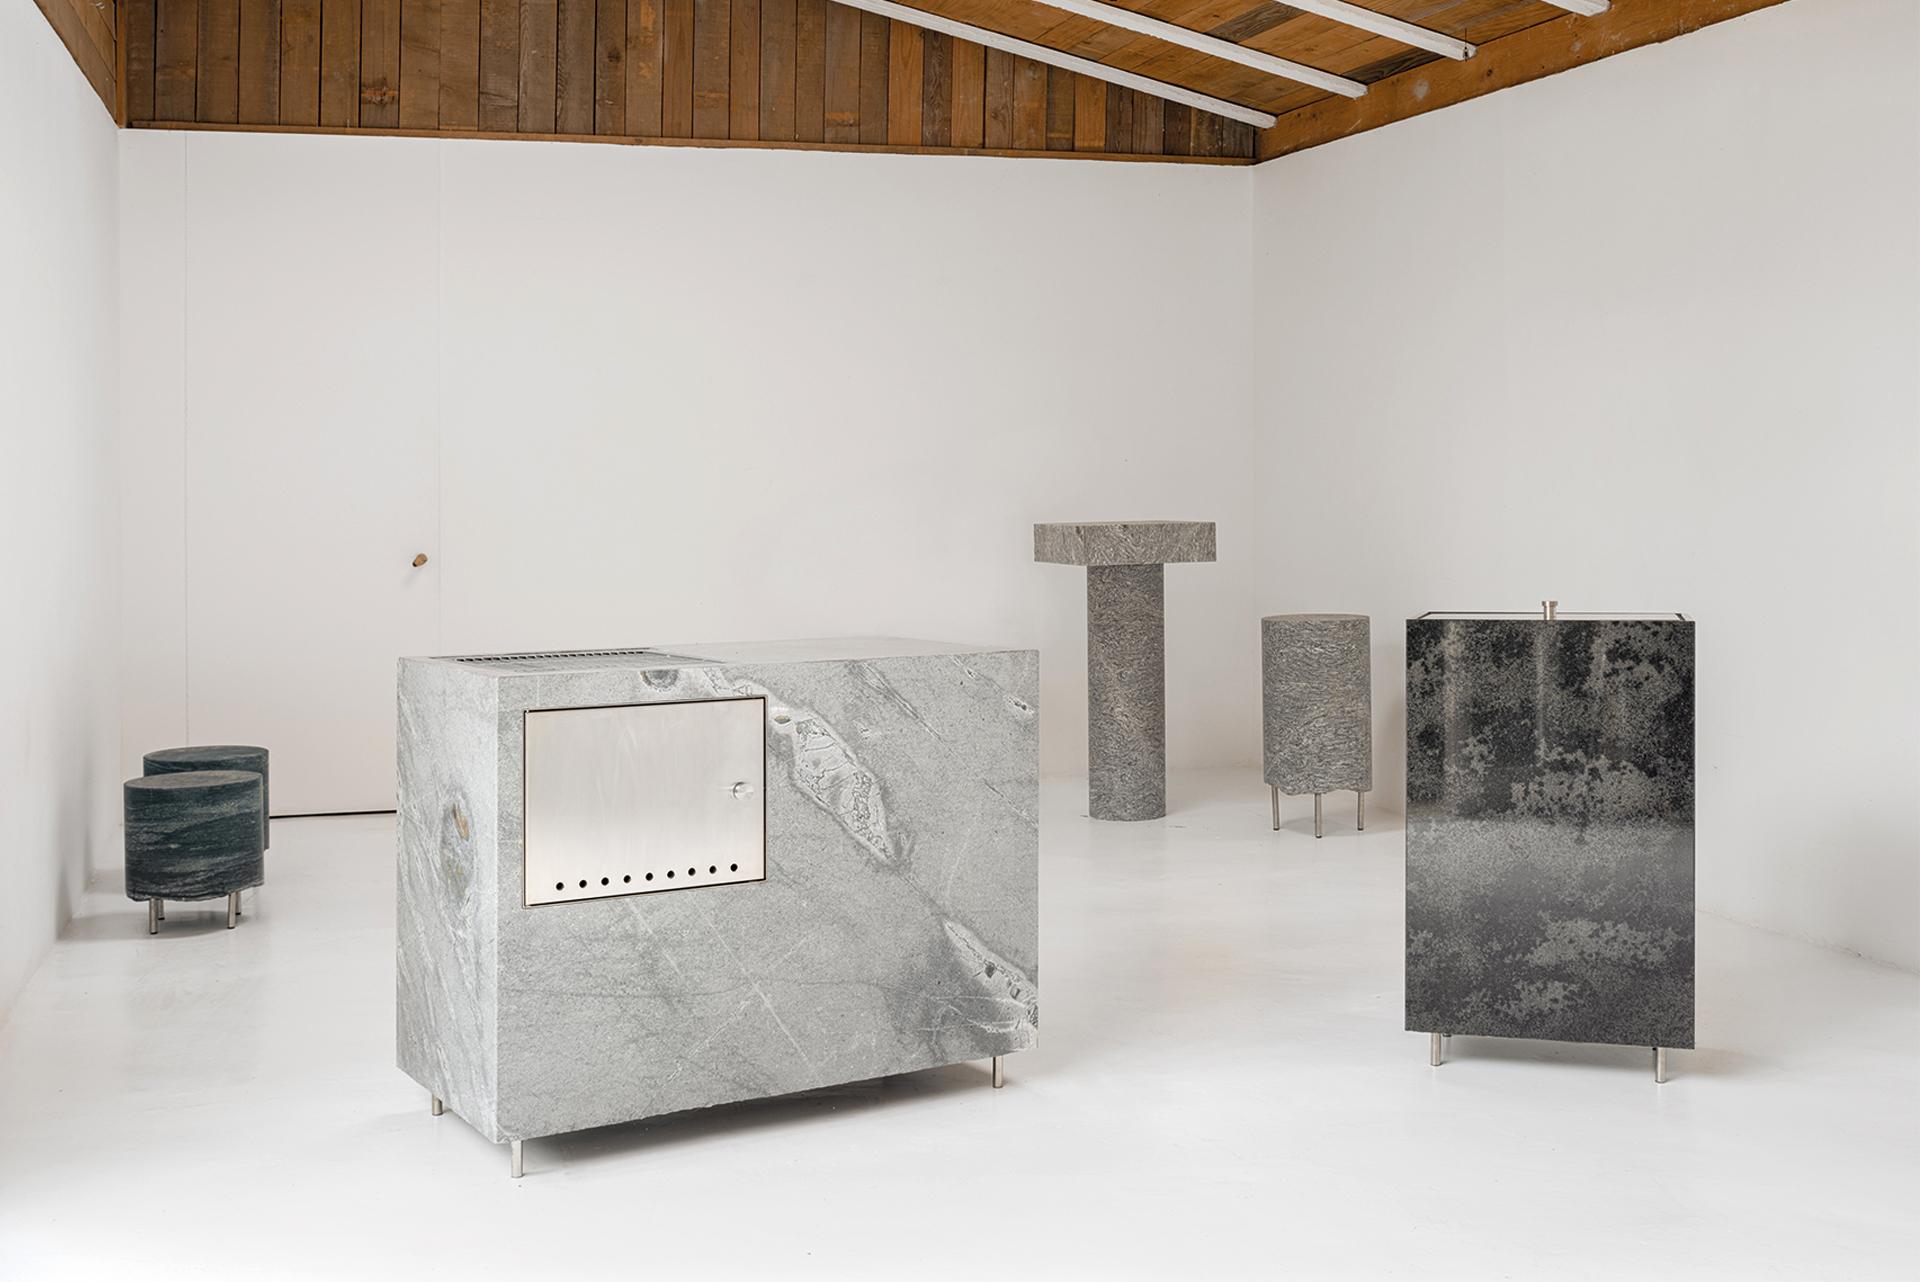 Sam Chermayeff
Barbecue
From the series “Concept Kitchen”
Produced in exclusive for SIDE GALLERY
Manufactured by Bagnara
Italy, 2020
Atlantic stone marble
Contemporary Design

Measurements
120 cm x 60 cm x 95H cm
47,2 in x 23,6 in x 37,4H